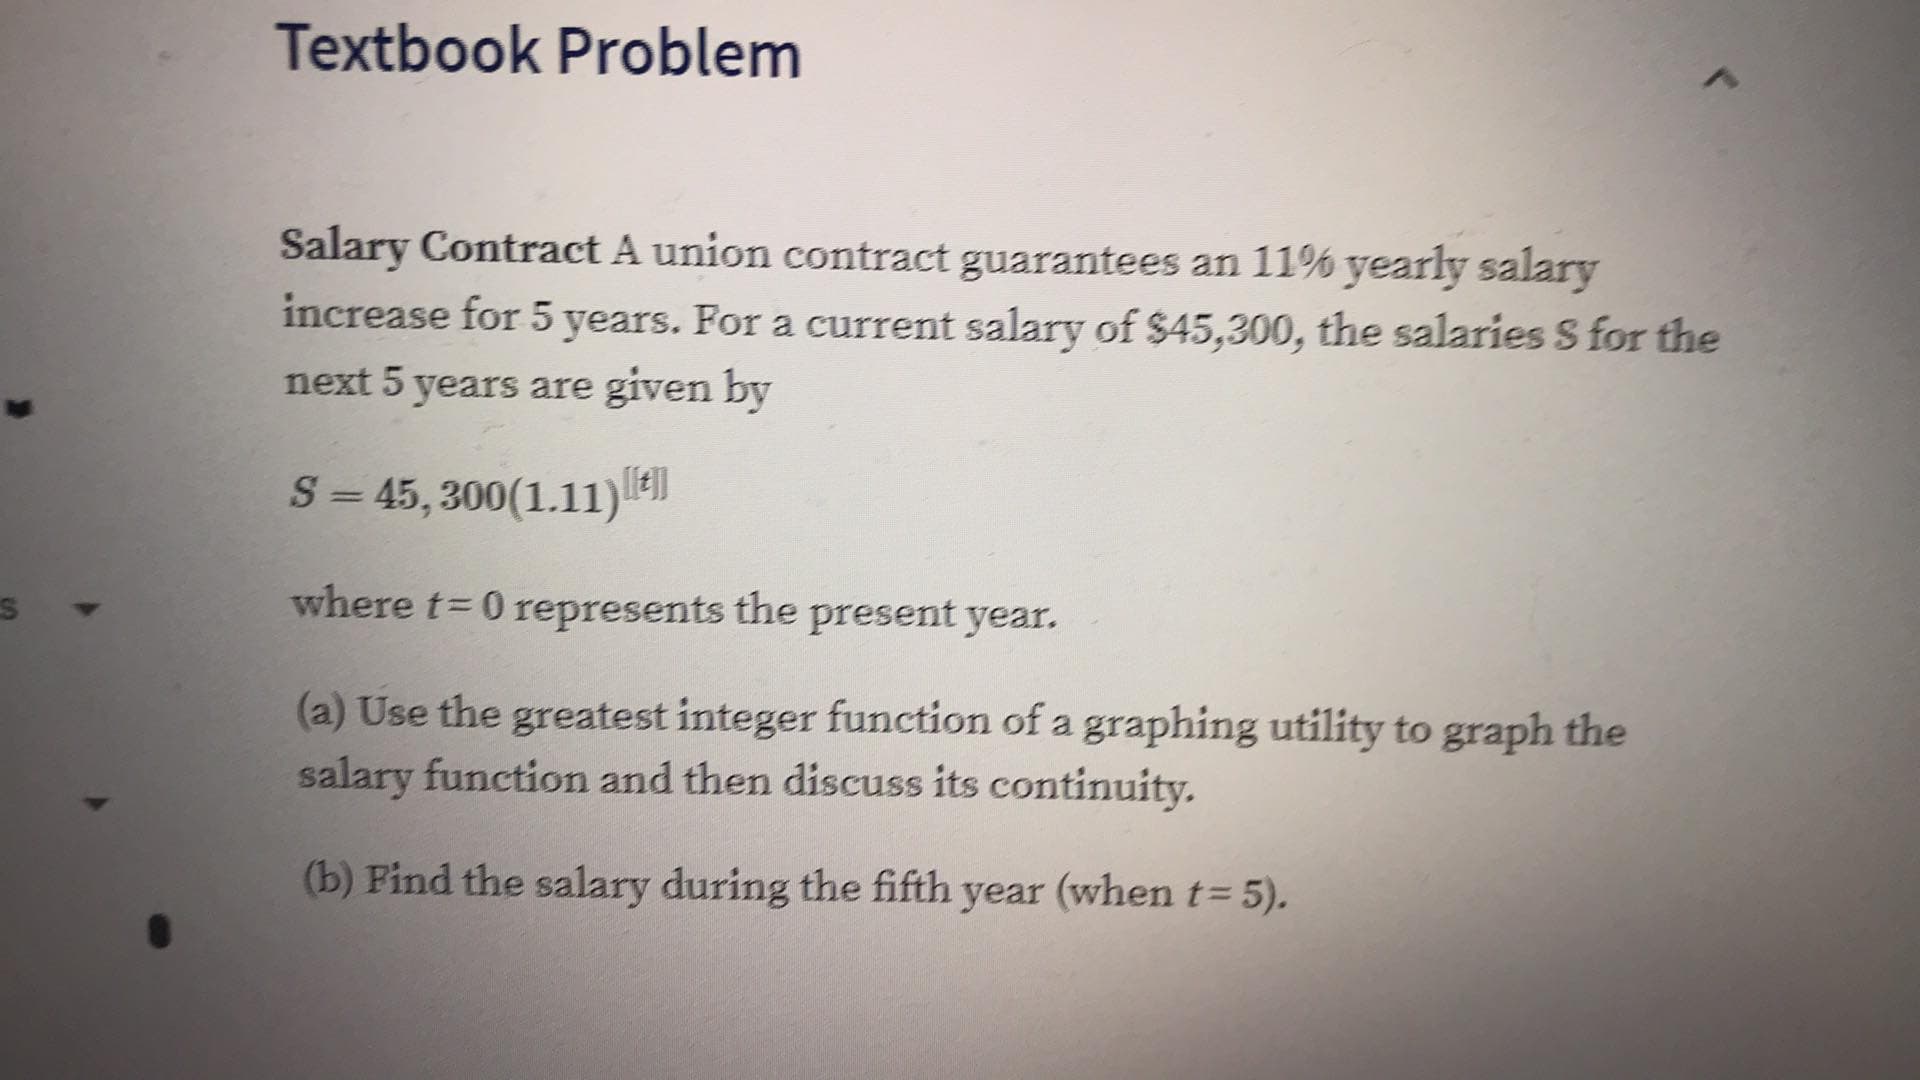 Textbook Problem
Salary Contract A union contract guarantees an 11% yearly salary
increase for 5 years. For a current salary of $45,300, the salaries S for the
next 5 years are
given by
S45, 300(1.11)
where t
0 represents the present year.
(a) Use the greatest integer function of a graphing utility to graph the
salary function and then discuss its continuity.
(b) Find the salary during the fifth year (when t= 5).
